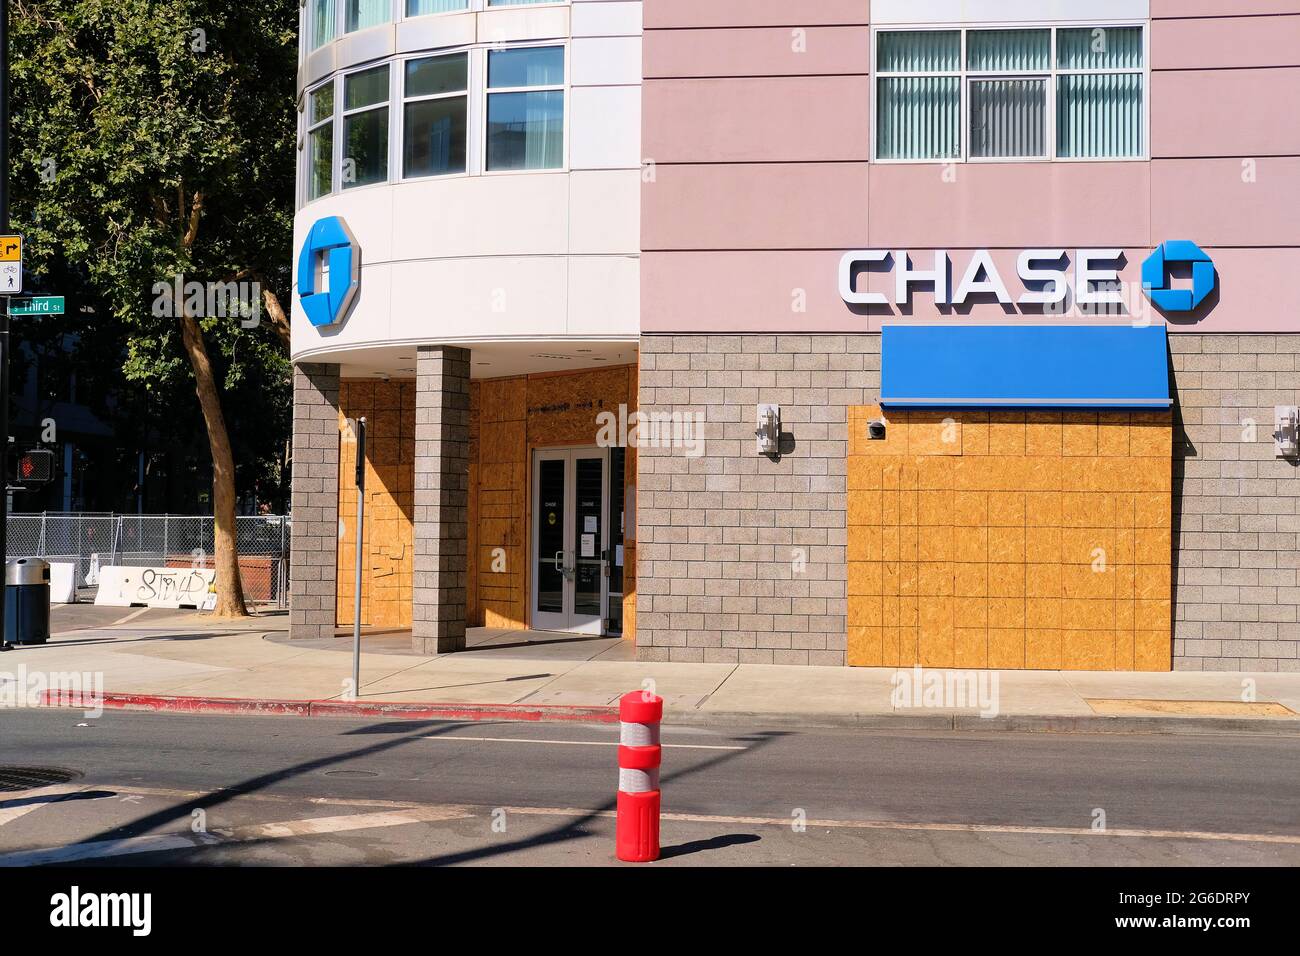 Exterior view of a boarded up and temporarily closed Chase bank in downtown San Jose, California; fear of protesters, looting, and social unrest. Stock Photo